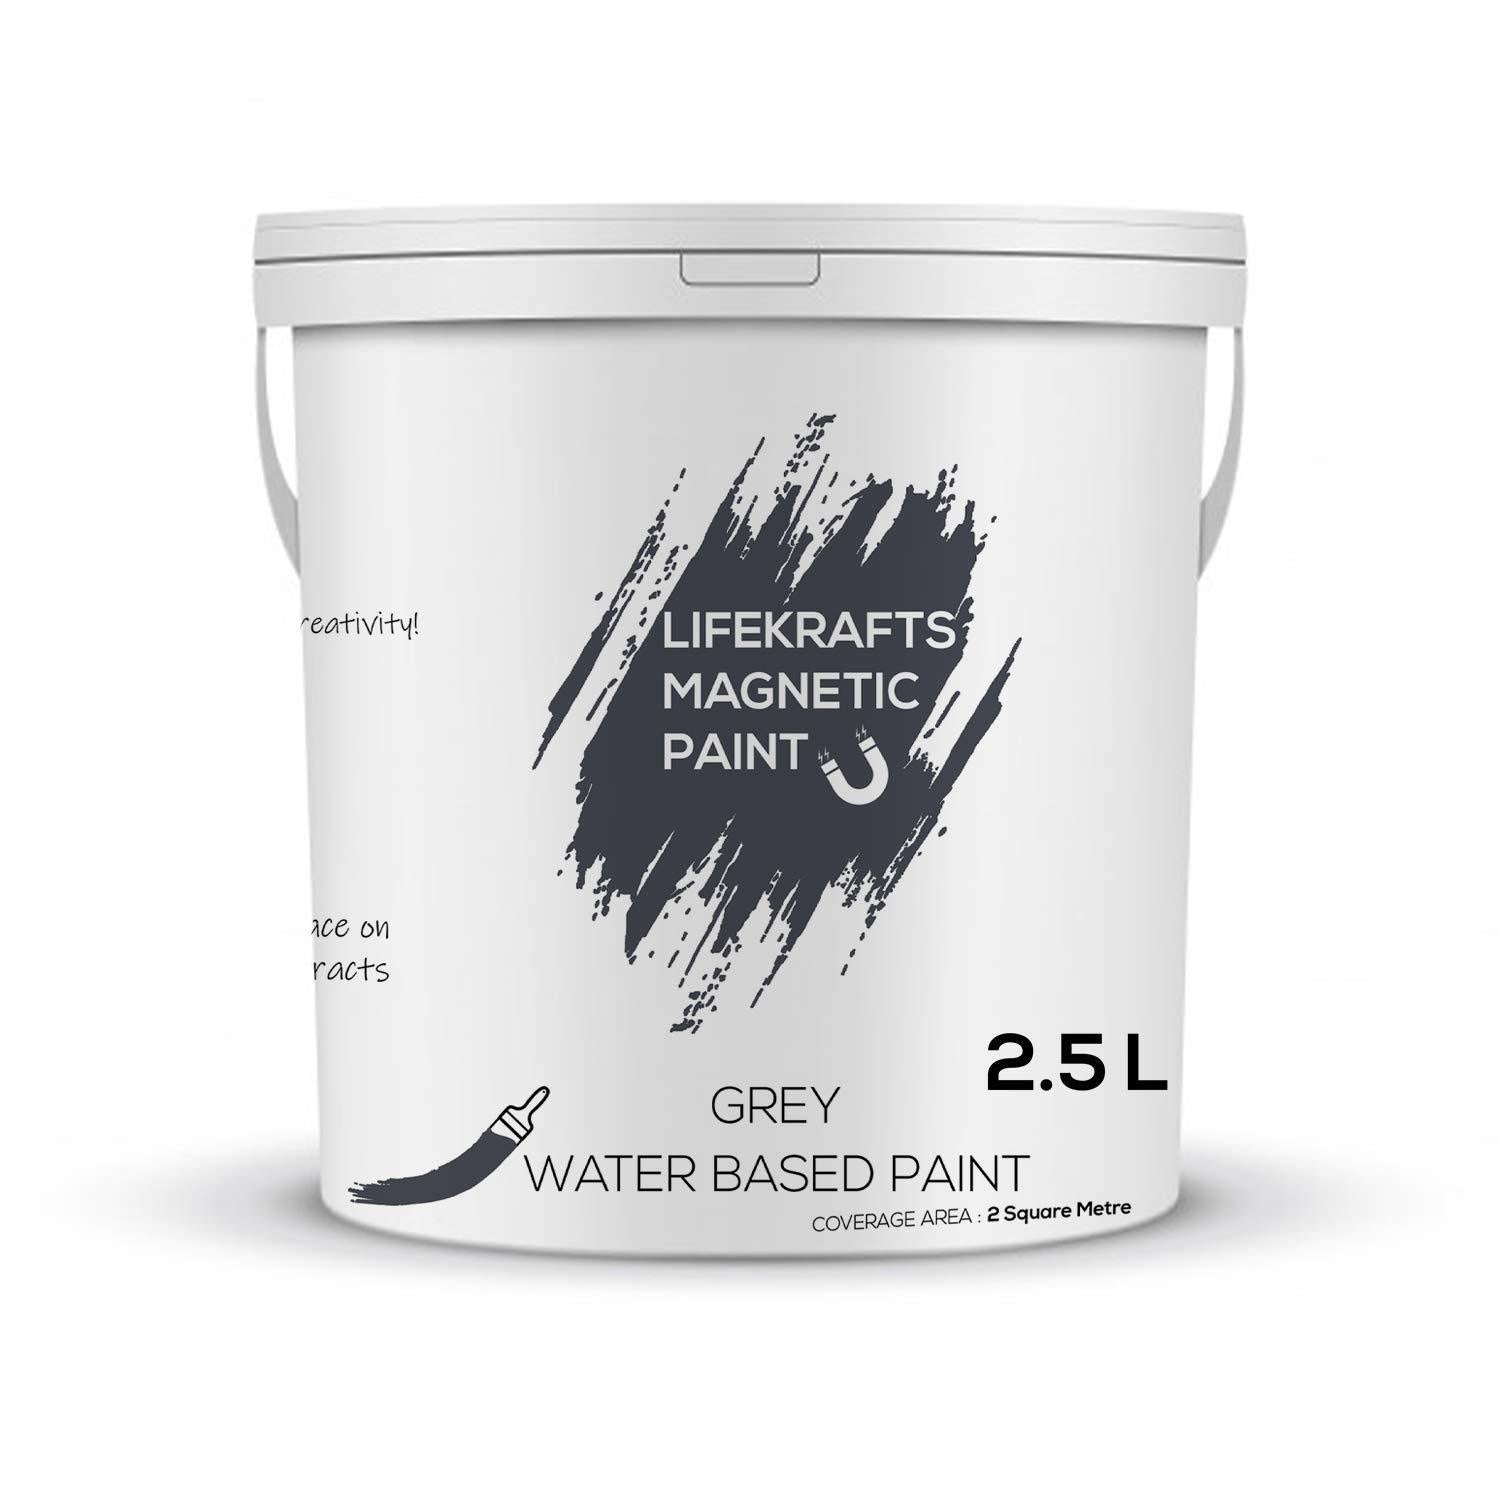 Magnetic Receptive Wall Paint with Grey Water based Paint – LifeKrafts